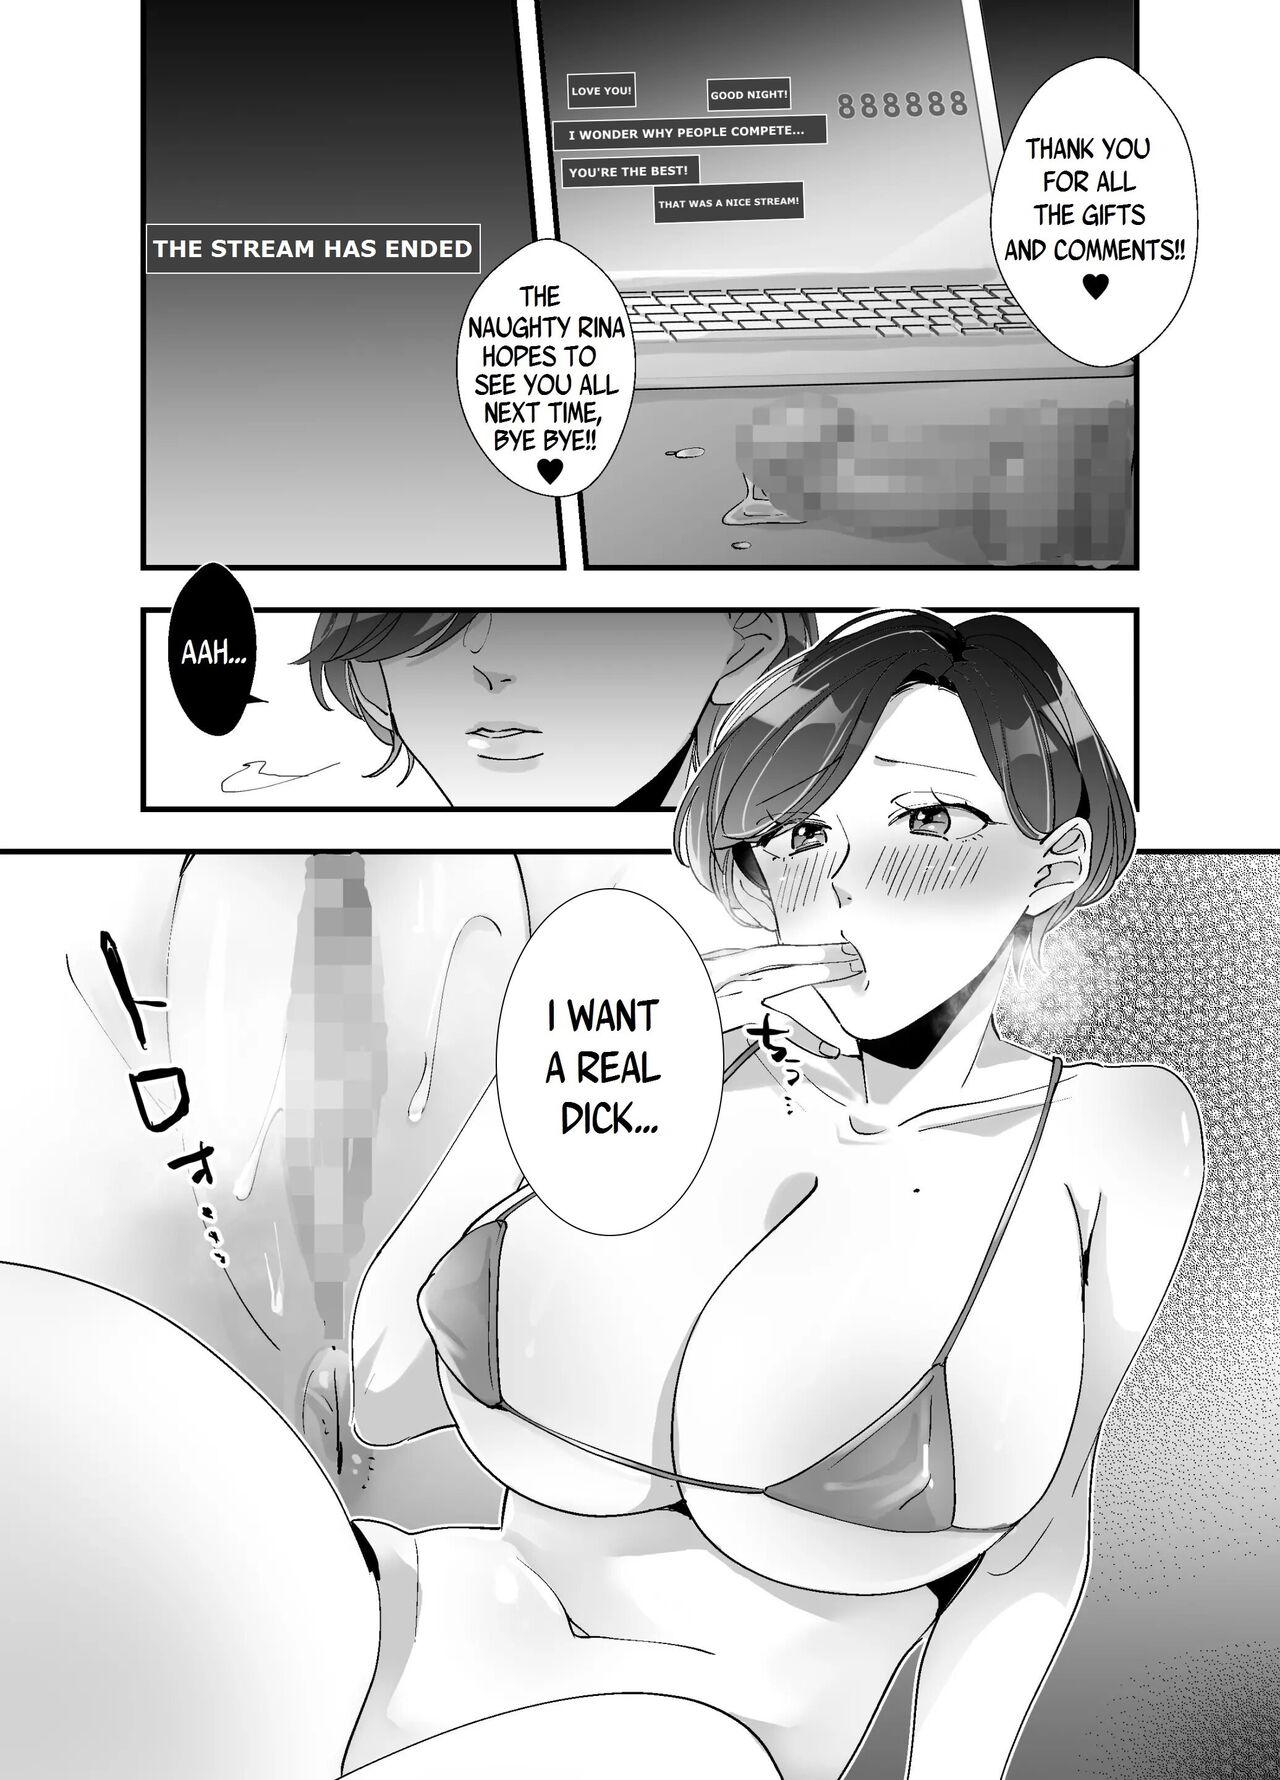 [Strong ERO] Echiechi Haishinsha wa Ani no Yome!? ~Hoshigari Manko no Daibouken~ | My Sister-in-Law is a Porn Streamer!? ~The Great Adventure of a Famous Pussy~ [English] [Yad-Scans] 2